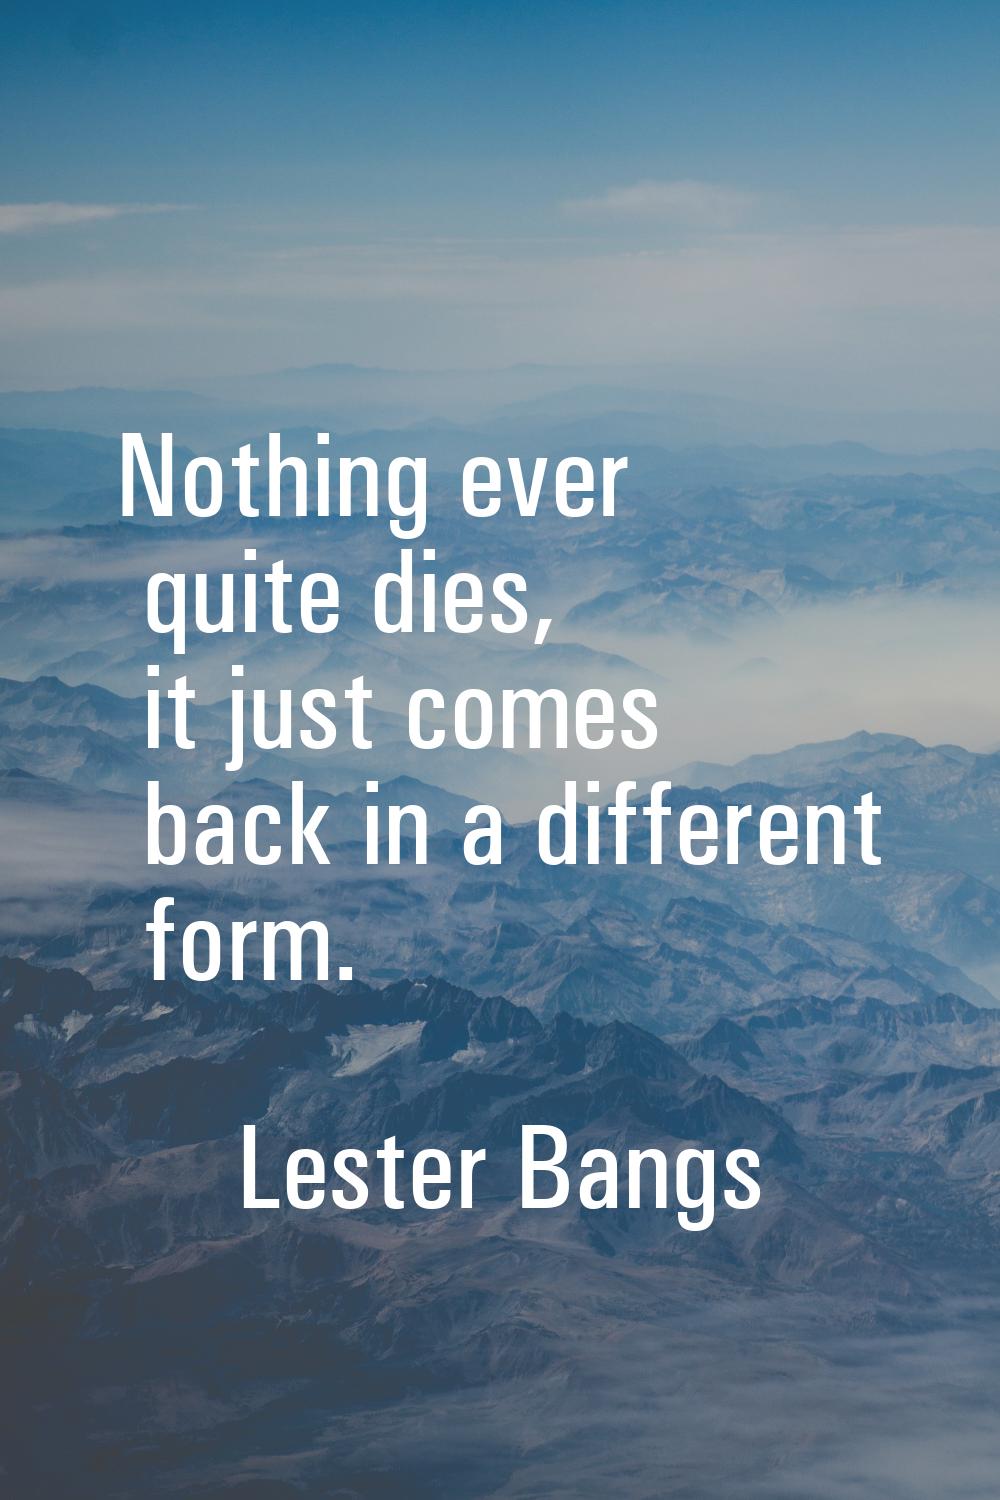 Nothing ever quite dies, it just comes back in a different form.